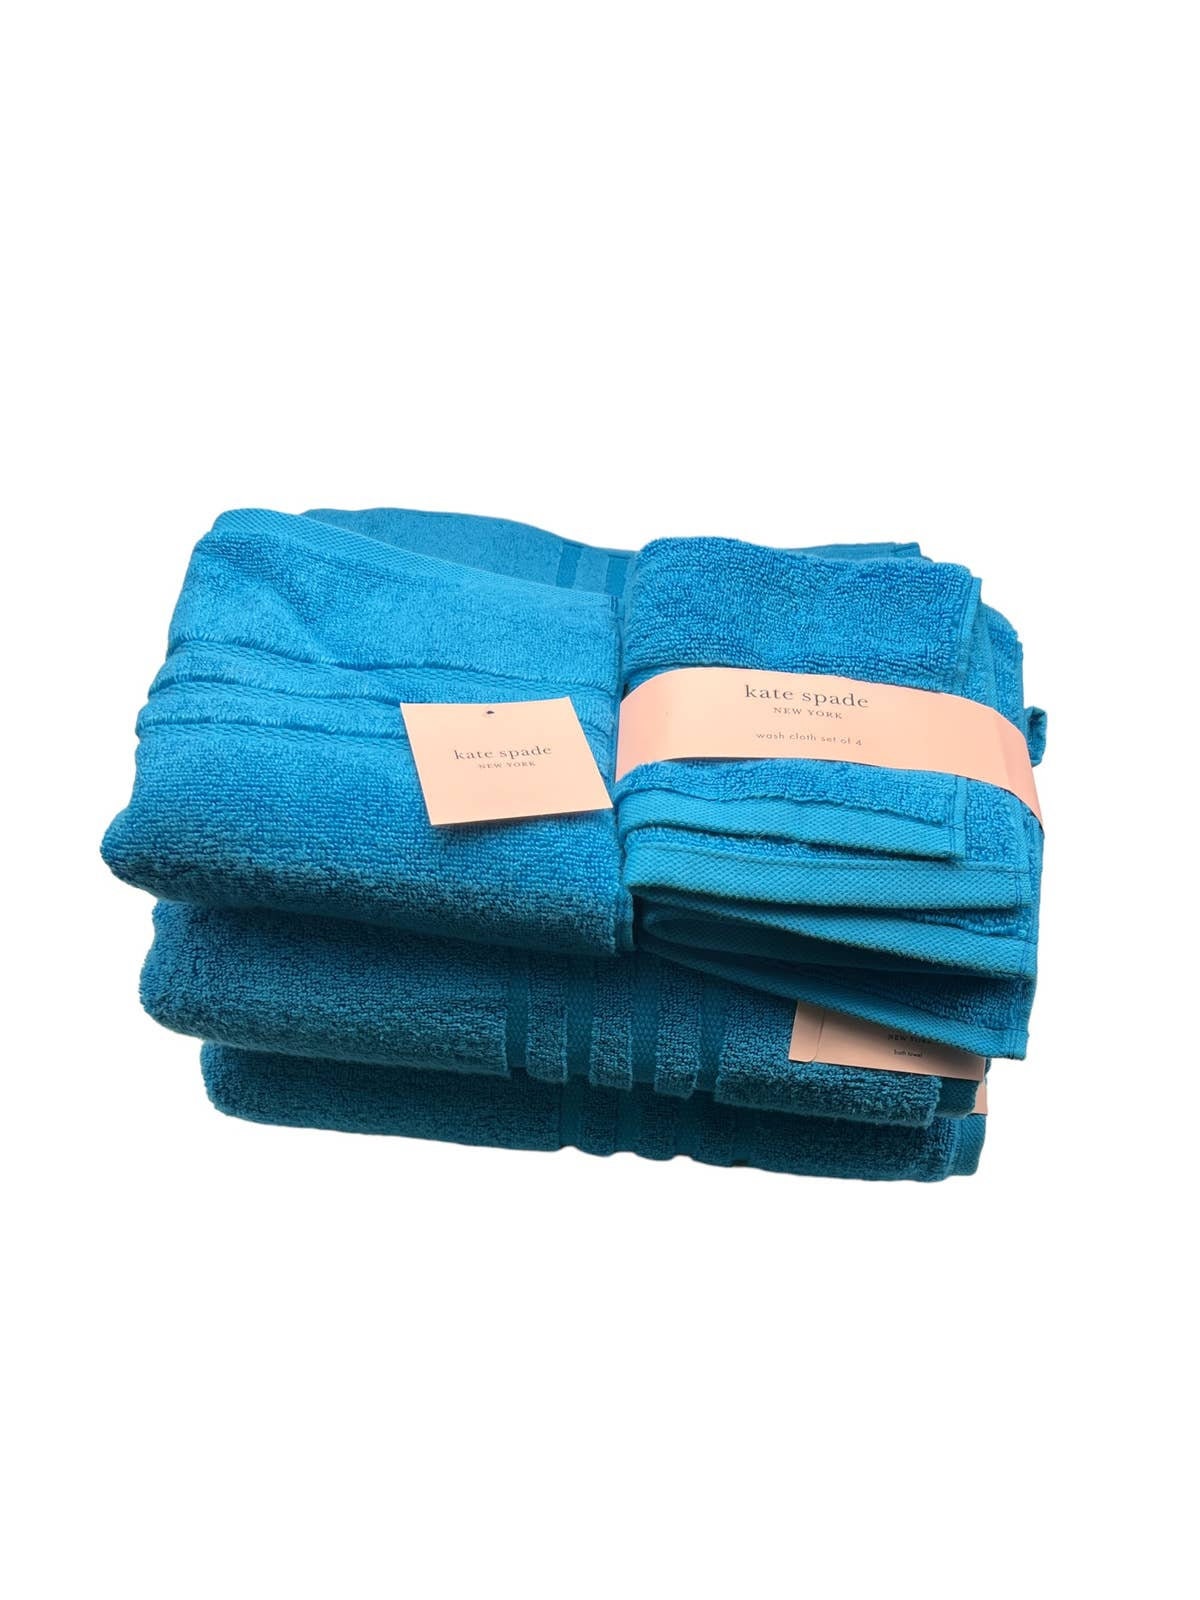 Total 42+ imagen kate spade towels - Abzlocal.mx